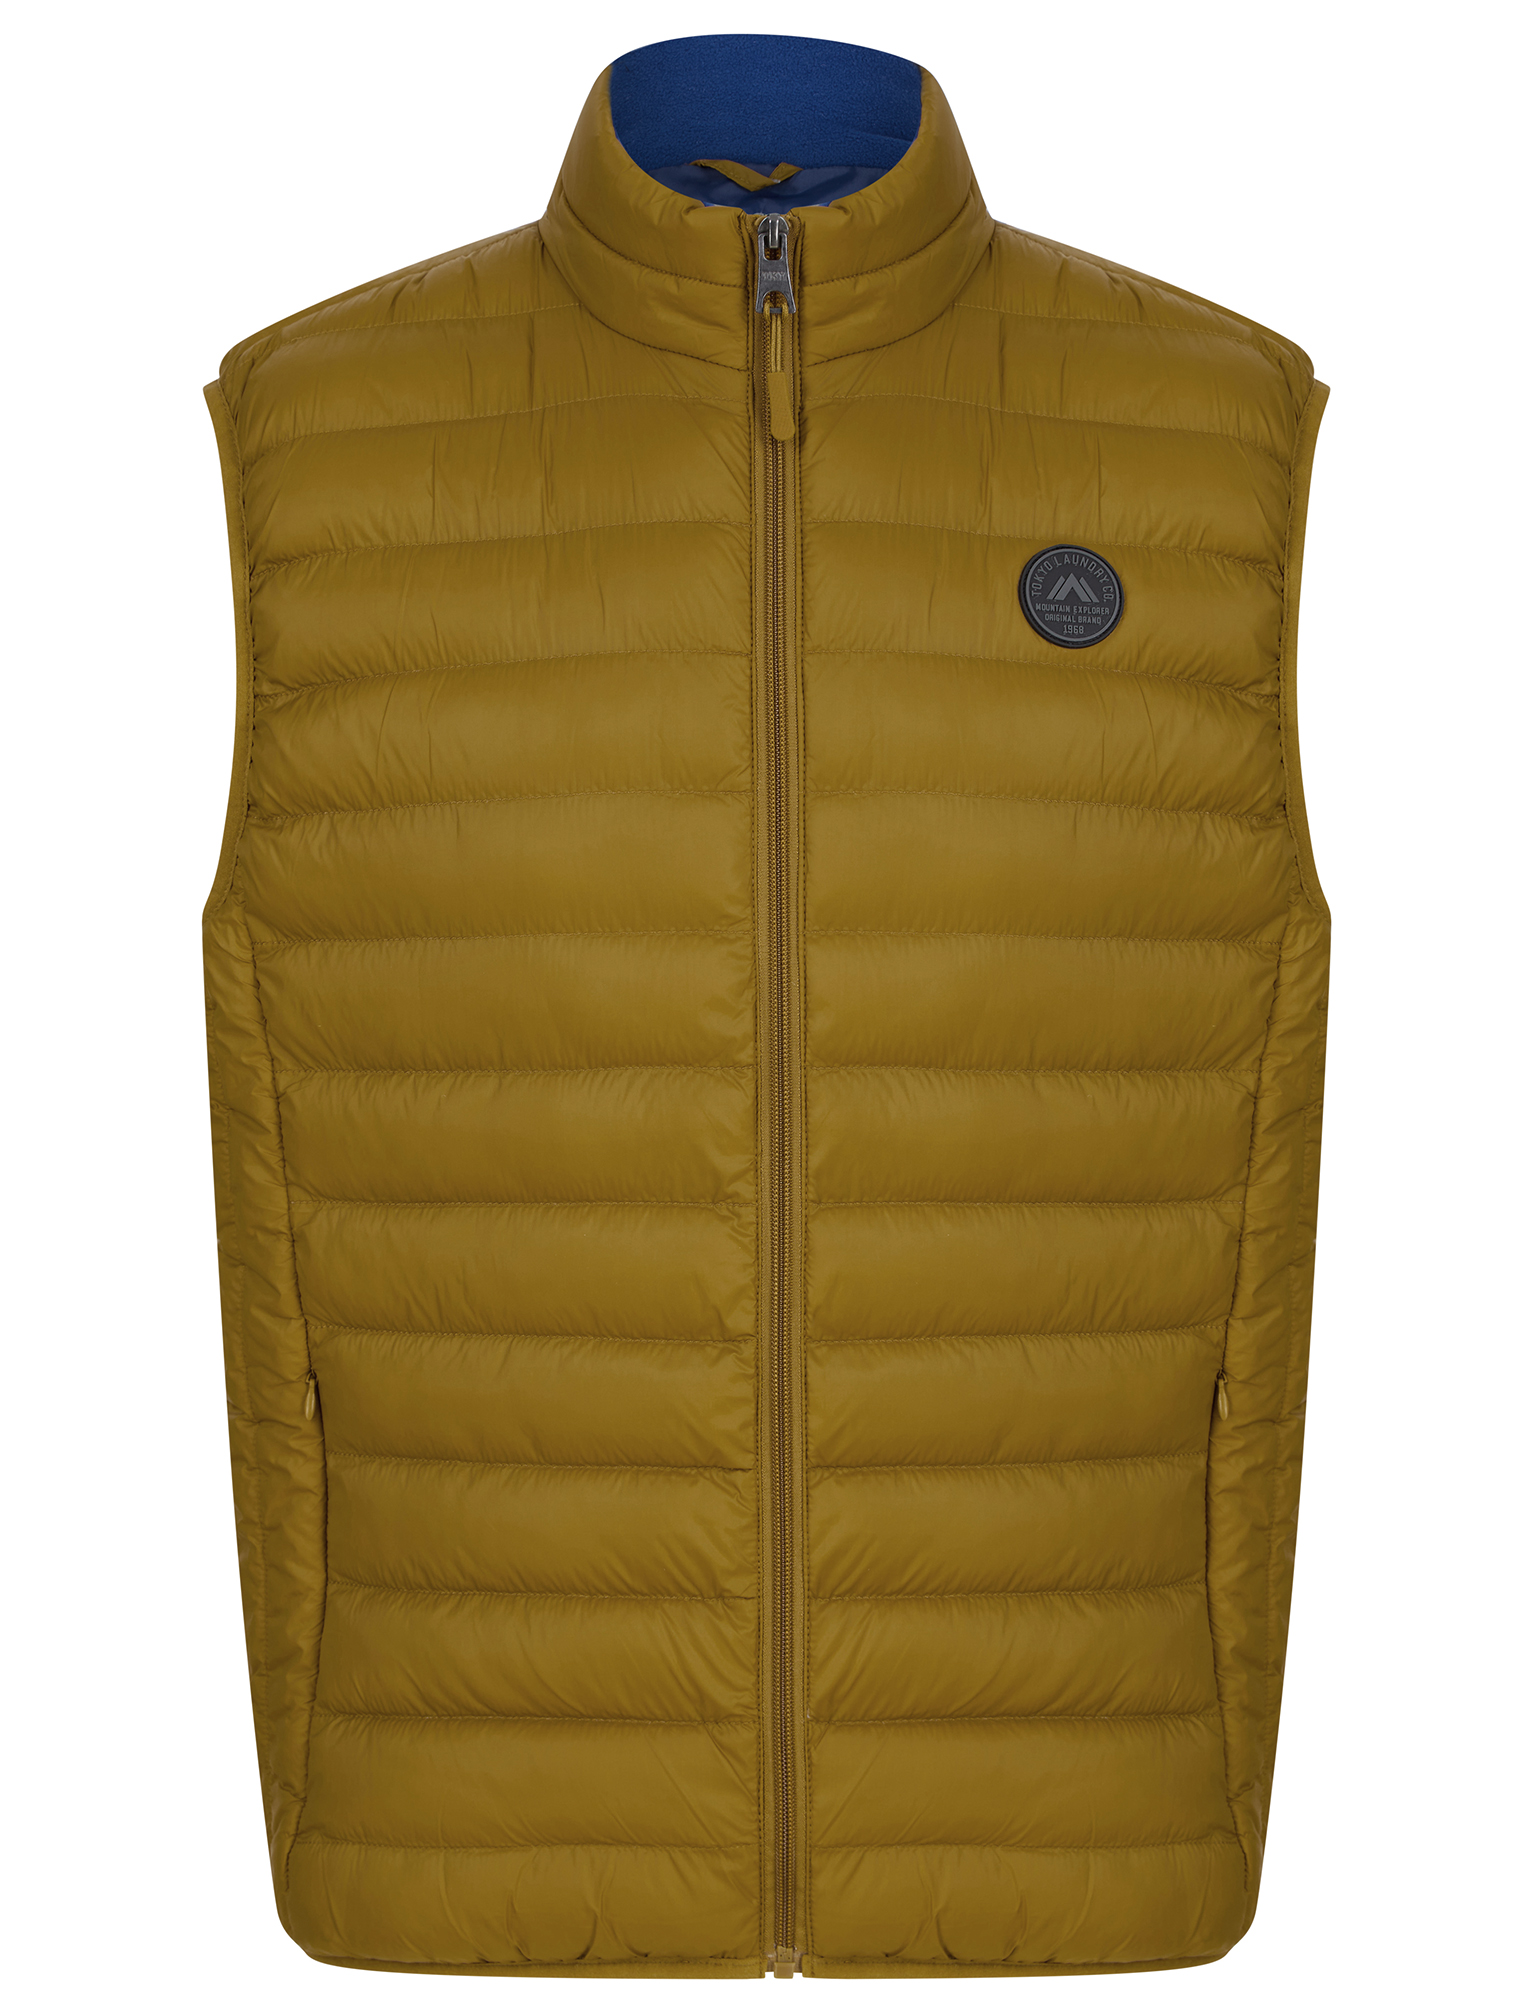 Tokyo Laundry Men's Gilet Quilted Puffer Body Warmer with Fleece Lined Collar RY11422